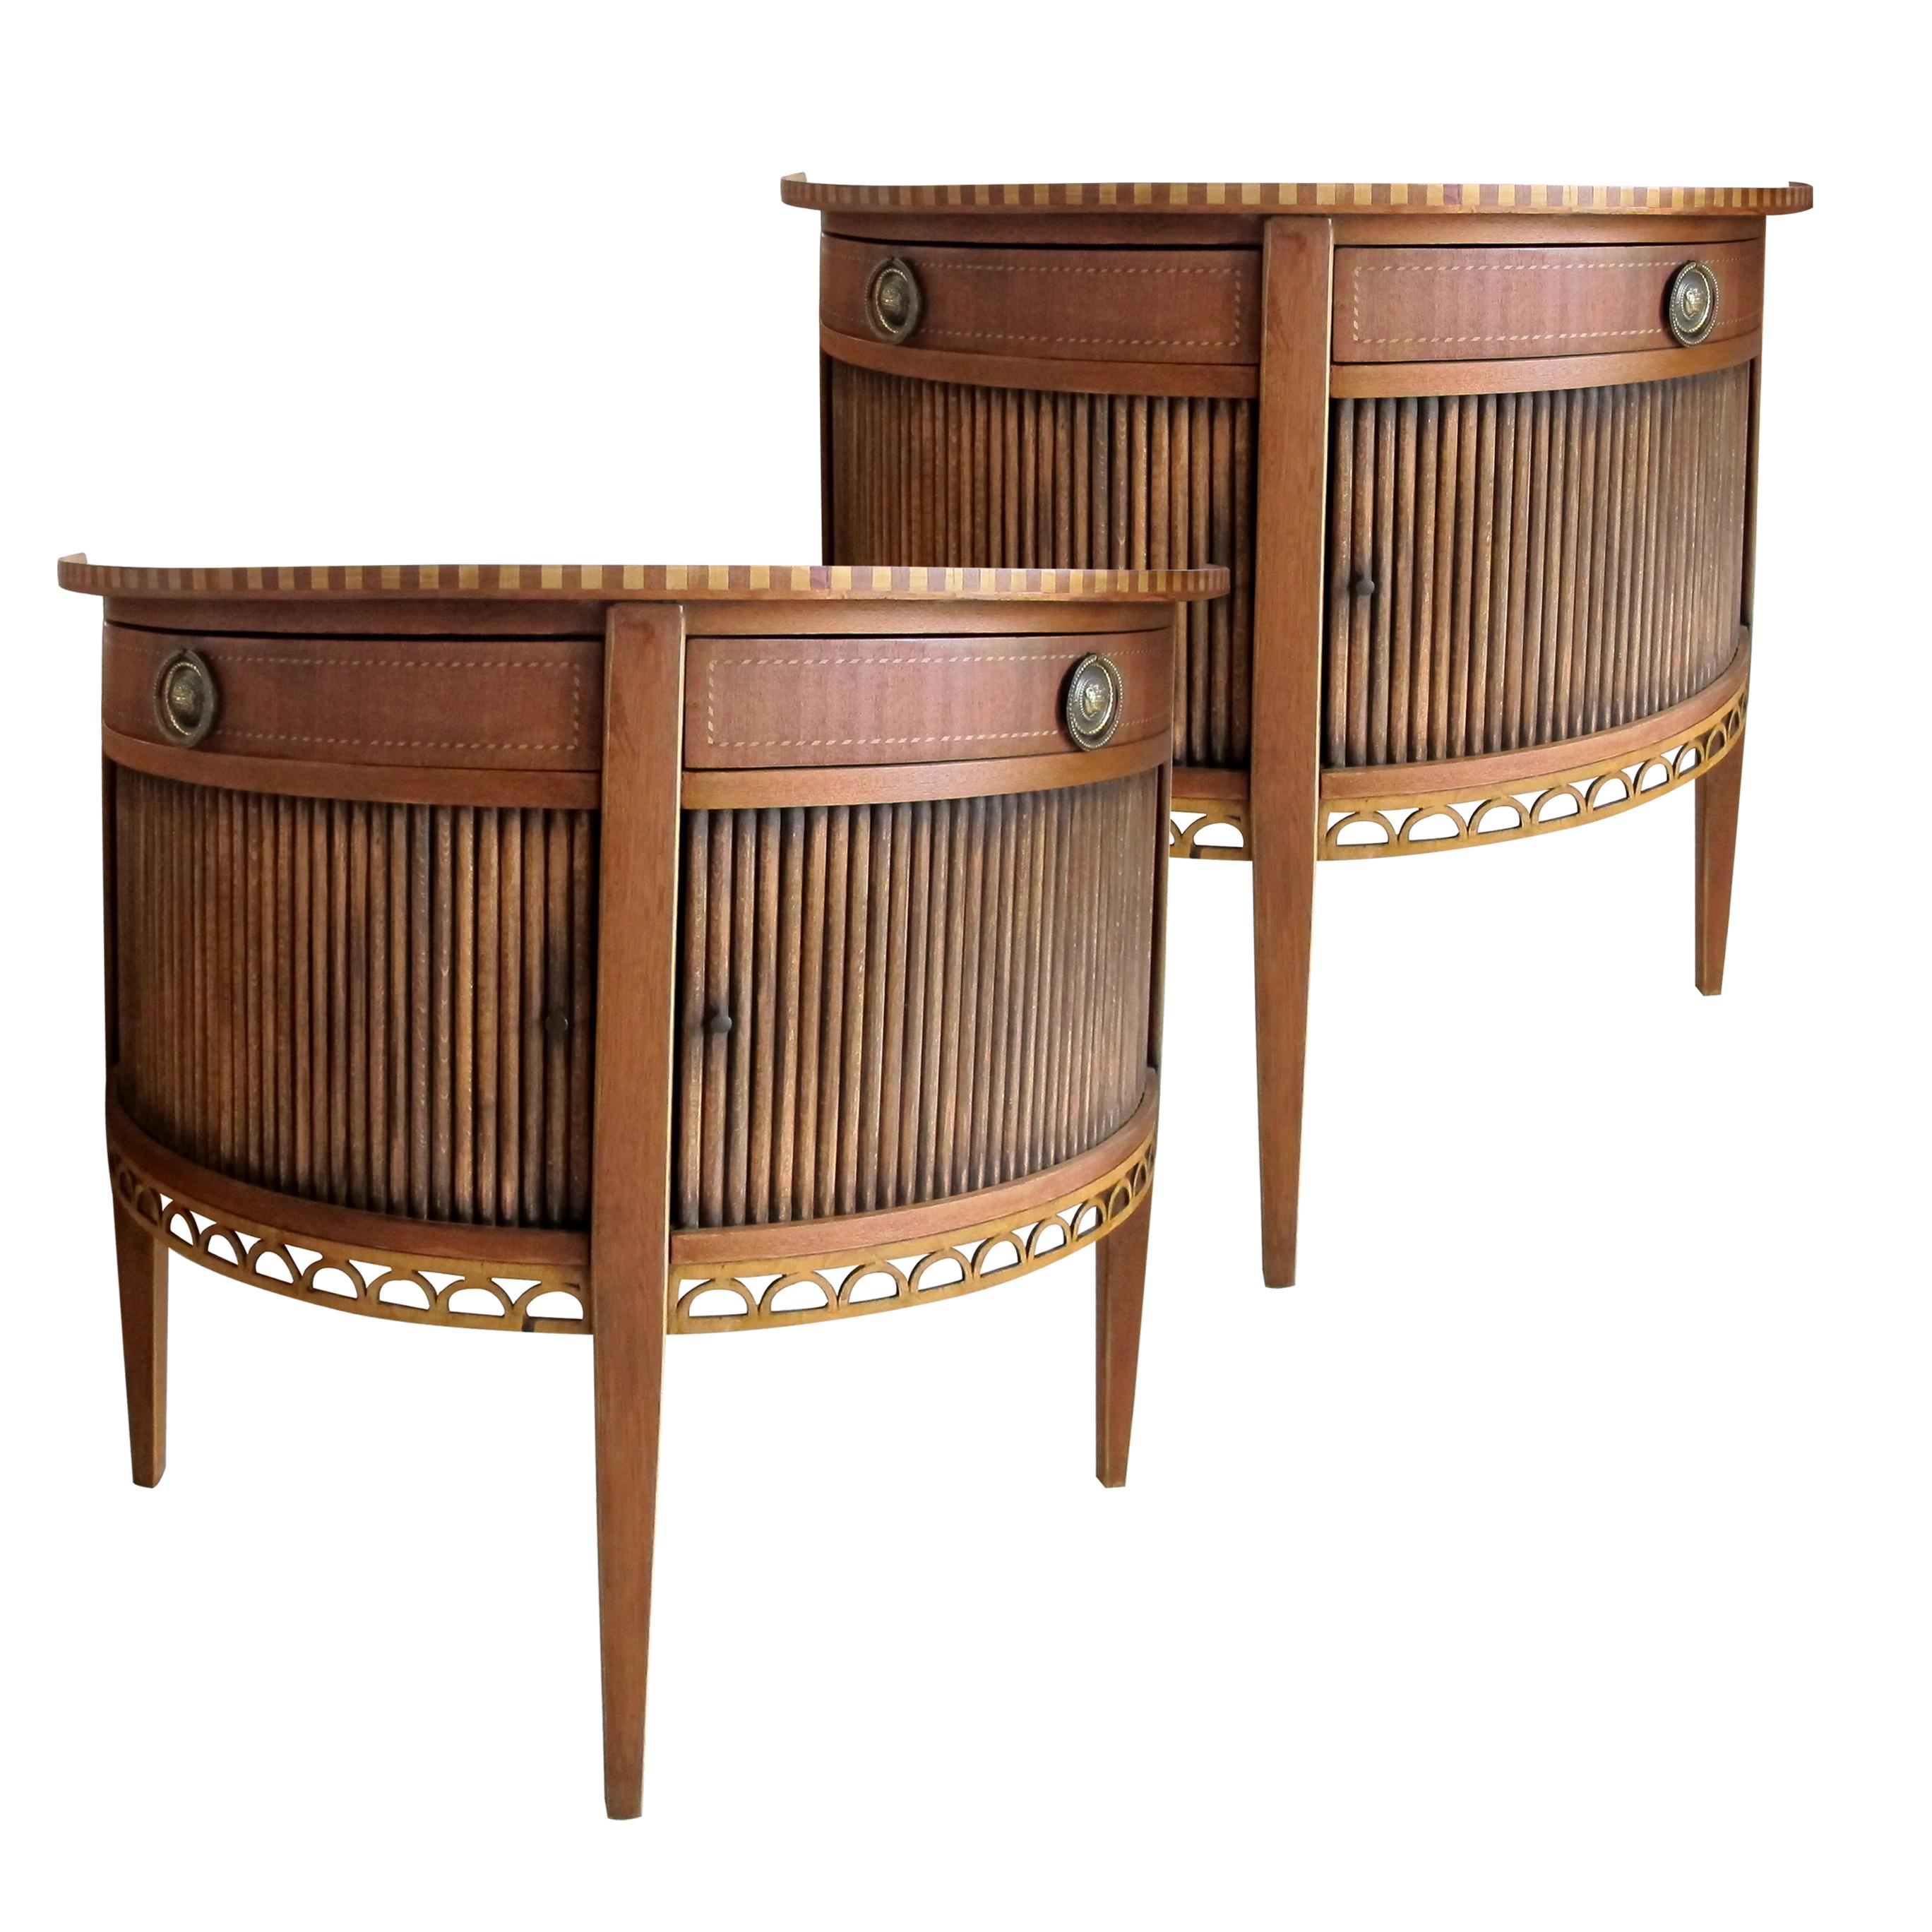 A pair of elegant mid century French side or end tables with feature tambour doors. The two top drawers swivel from the centre outwards. The tables are decorated with a marquetry trim on the top and on the drawers which feature their original brass